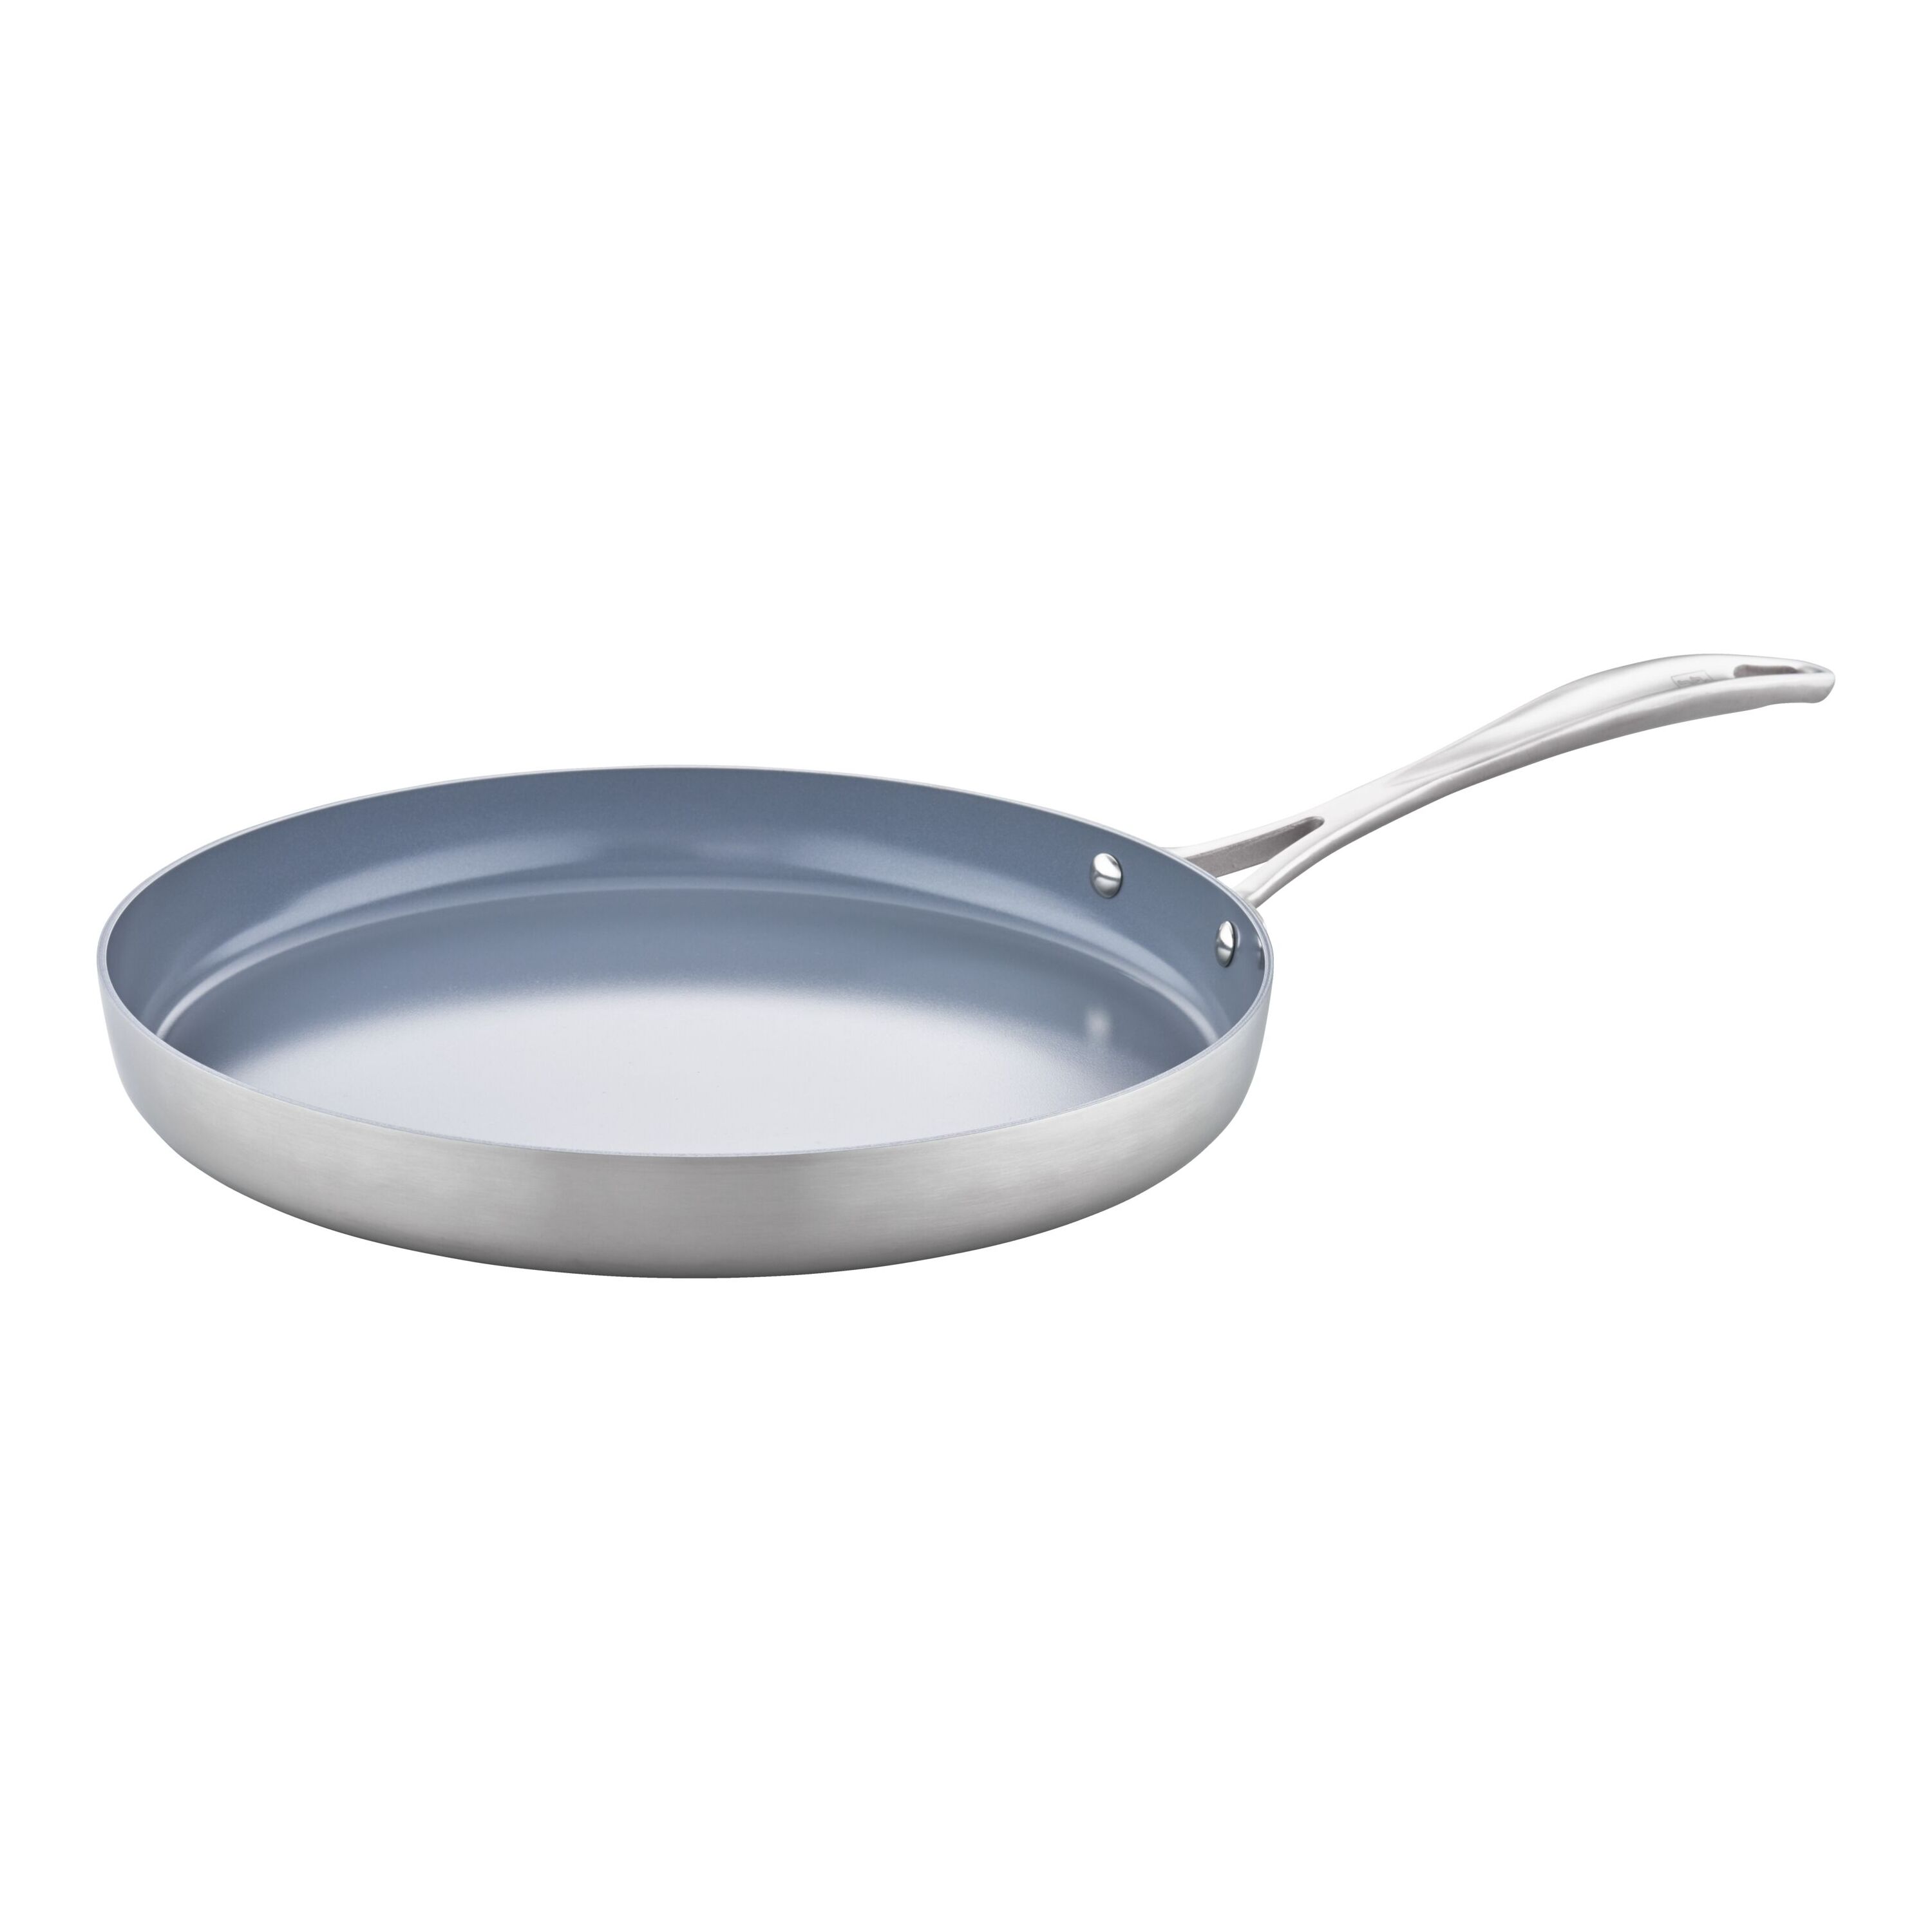  ZWILLING Spirit Stainless Fry Pan, 12-inch, Stainless